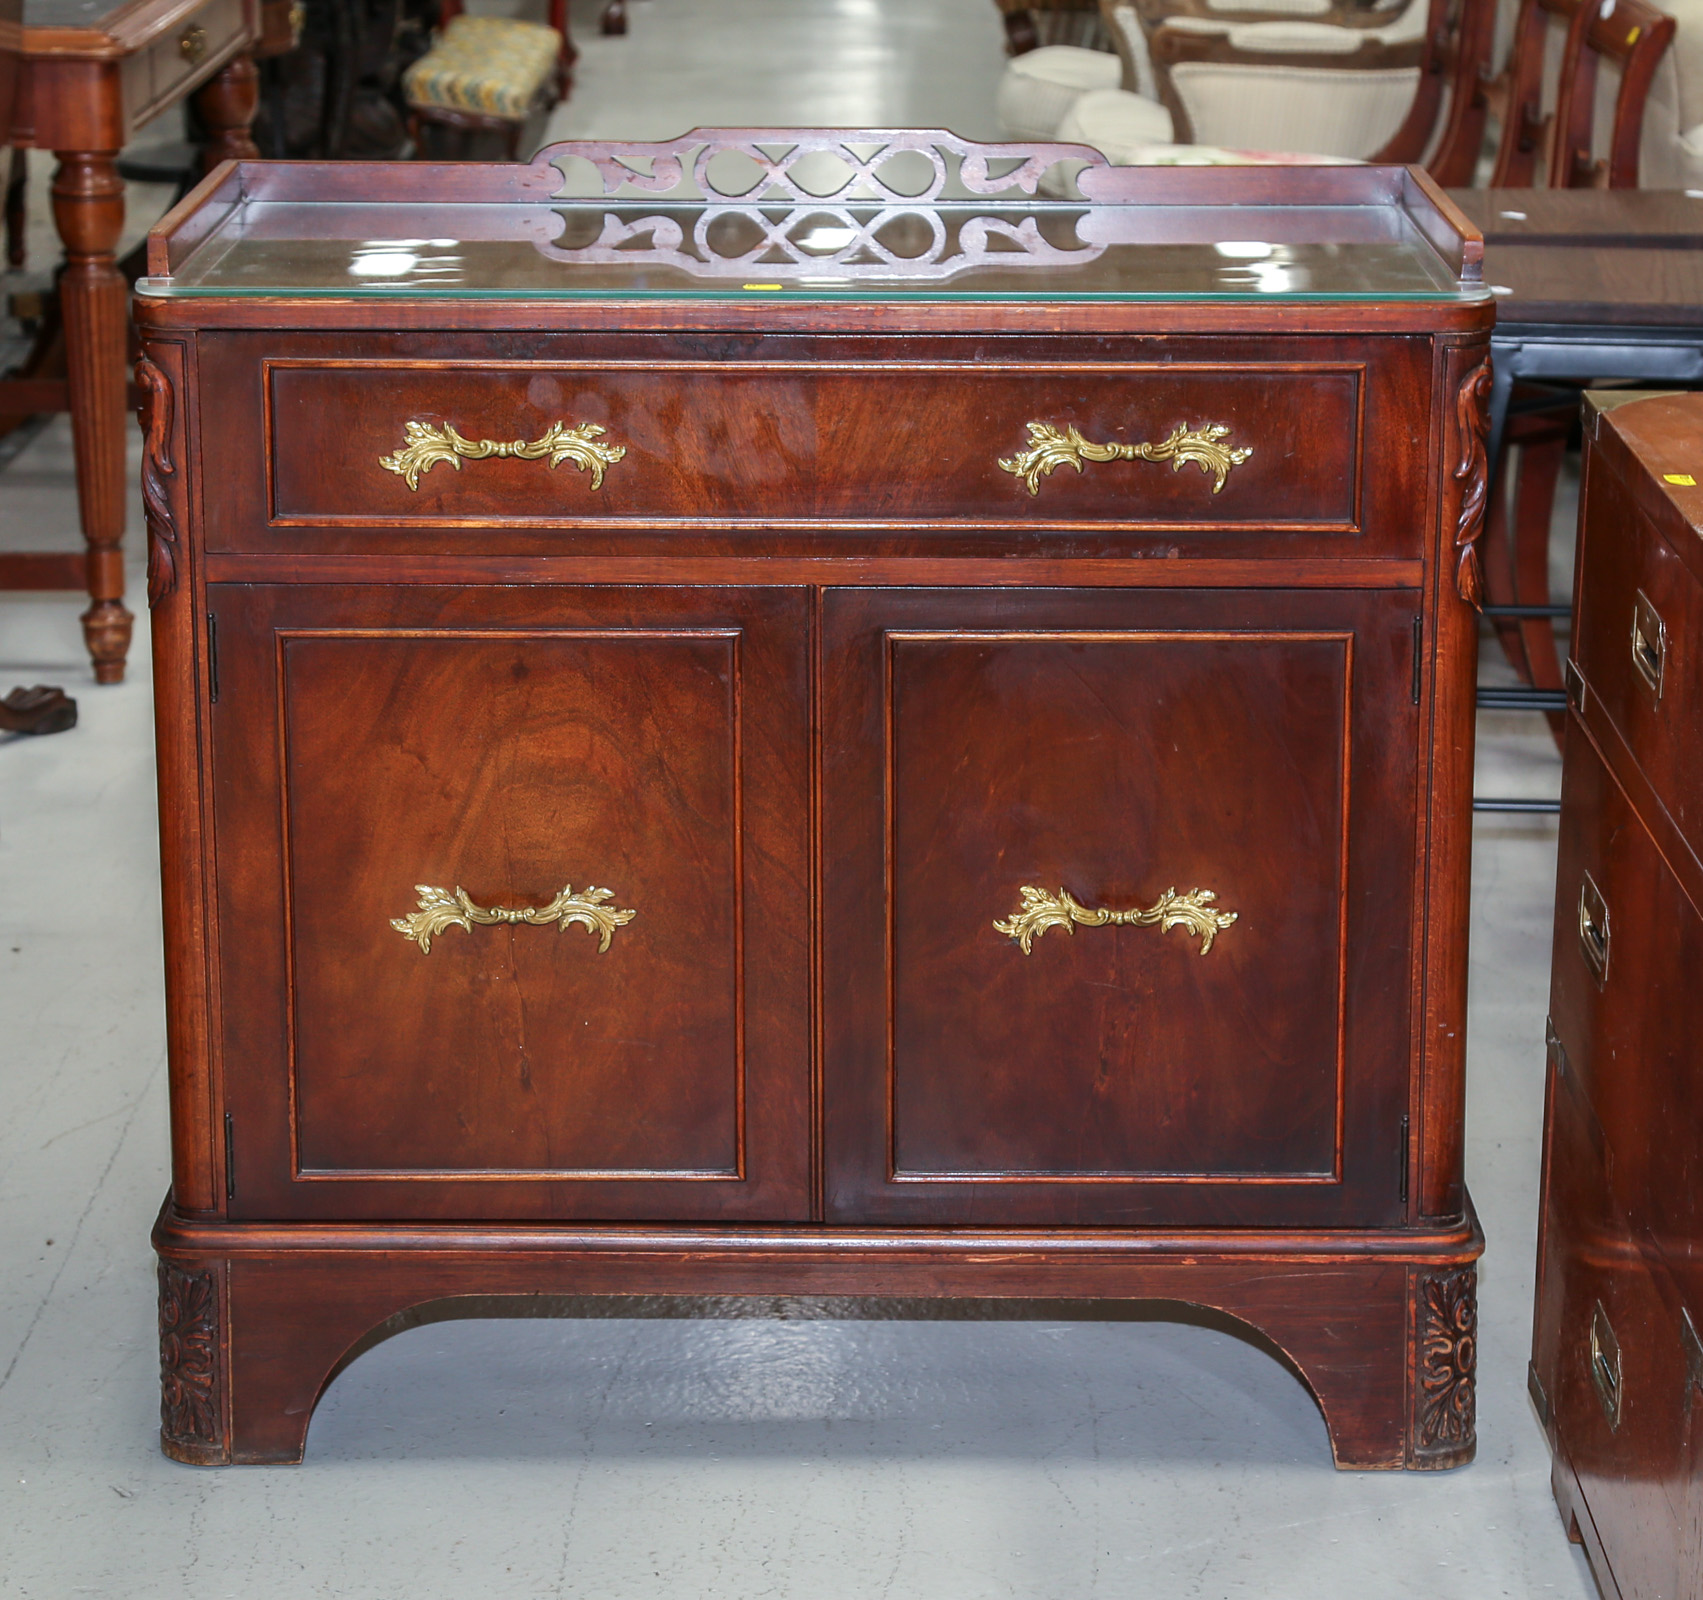 CHIPPENDALE REVIVAL MAHOGANY CABINET